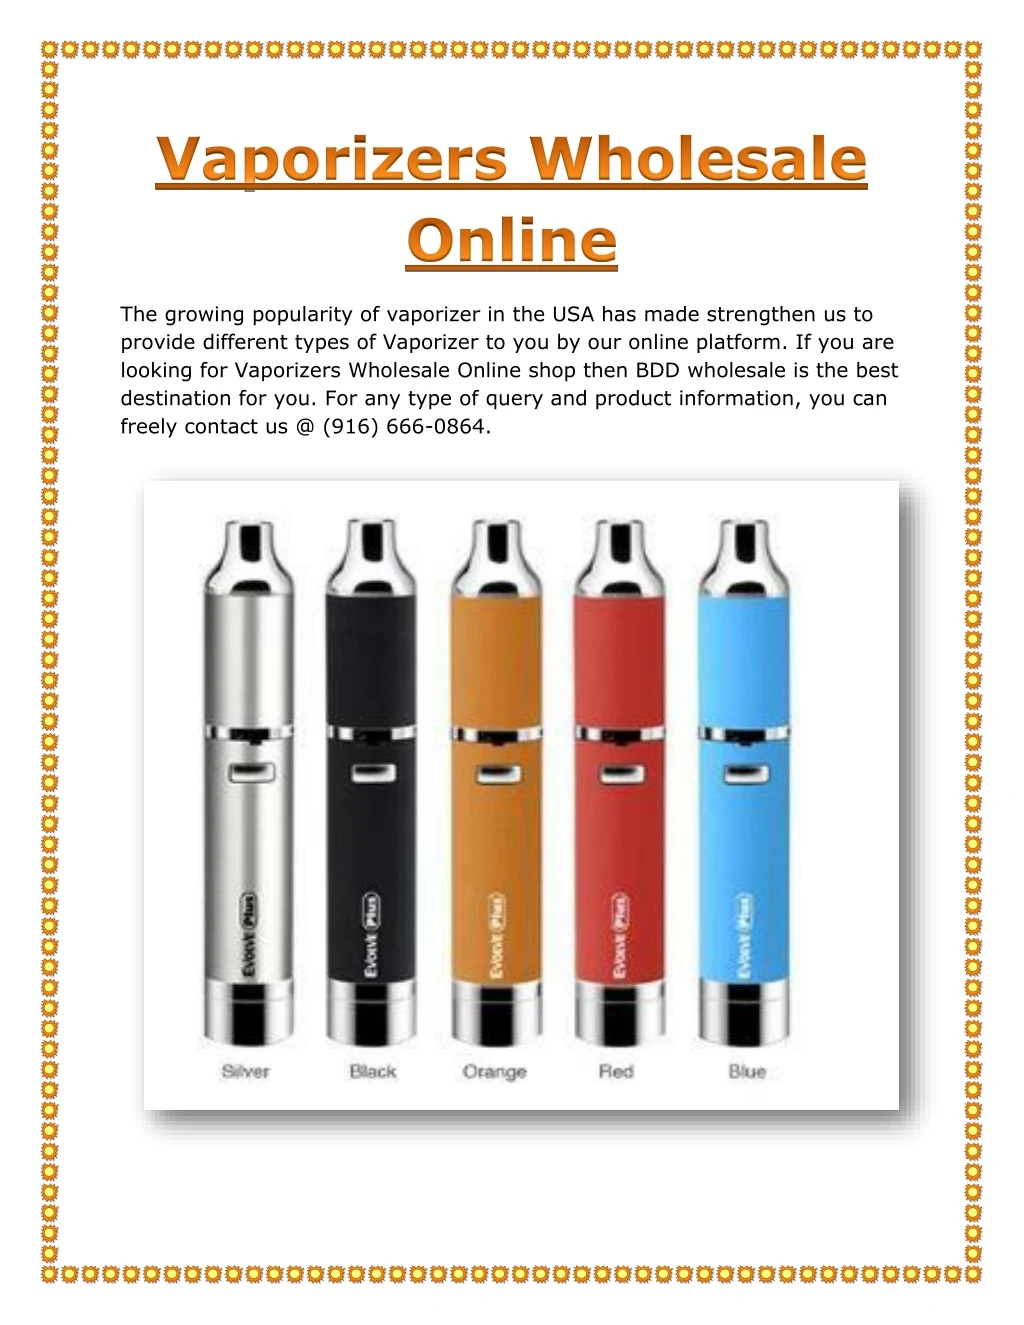 the growing popularity of vaporizer